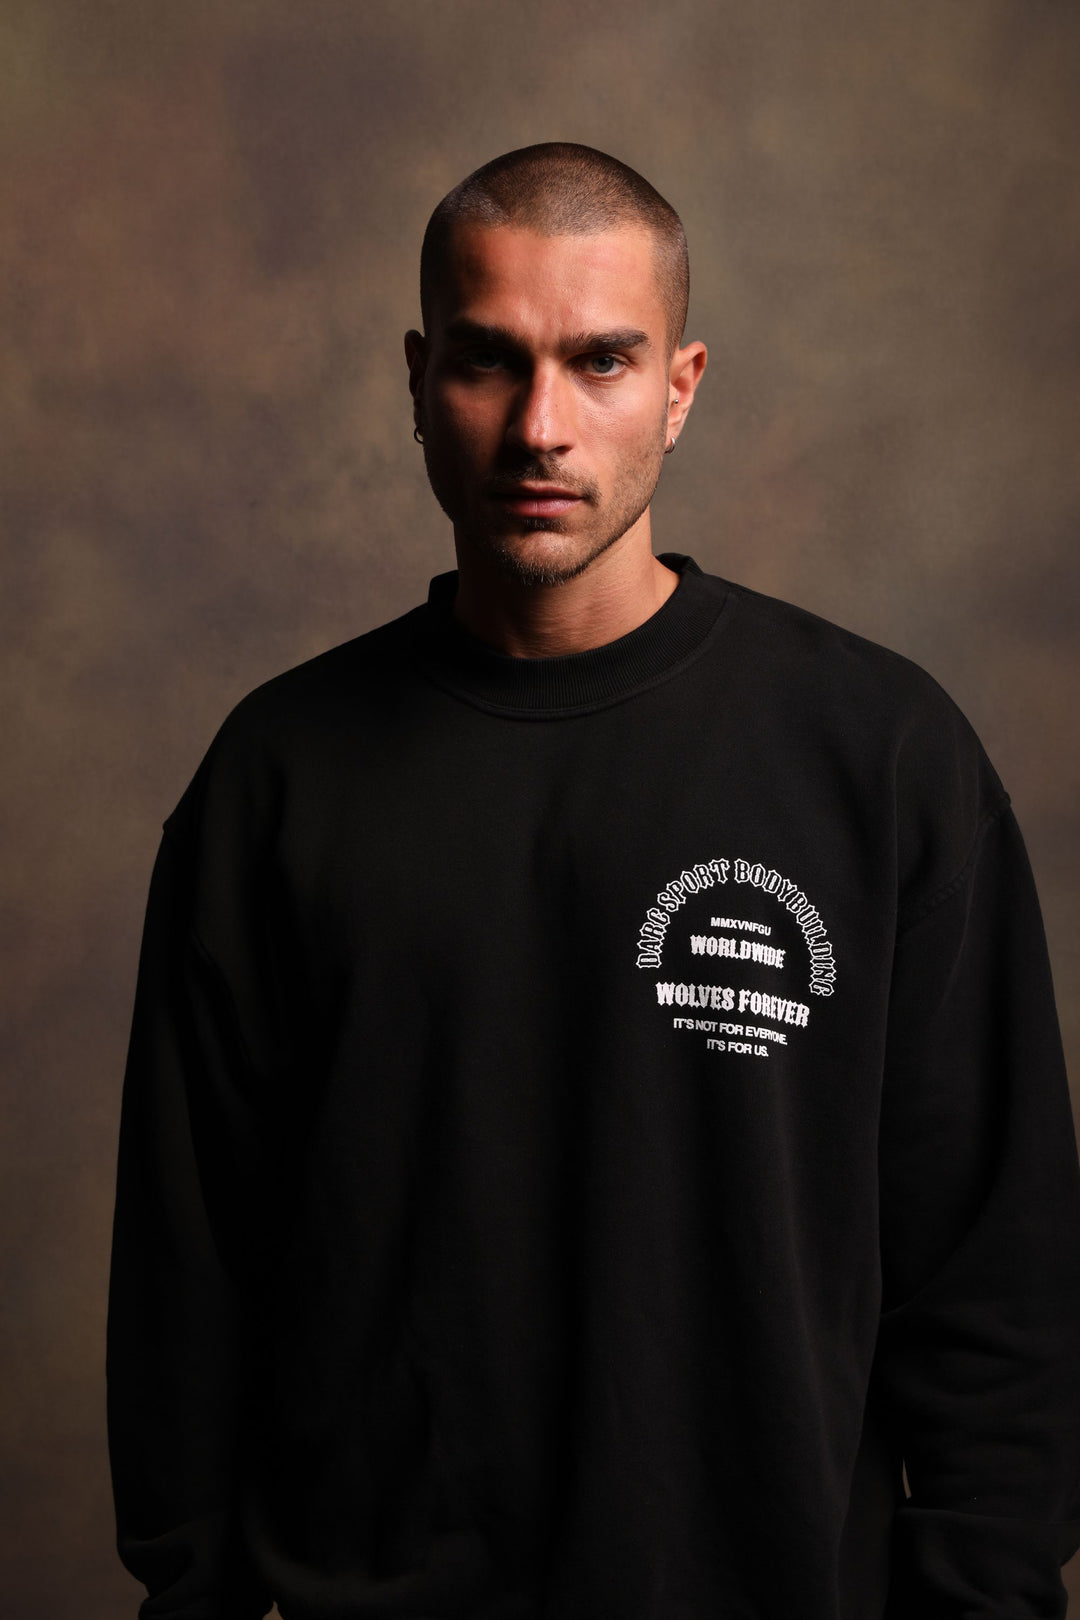 The One You Feed "Vintage London" Crewneck in Black